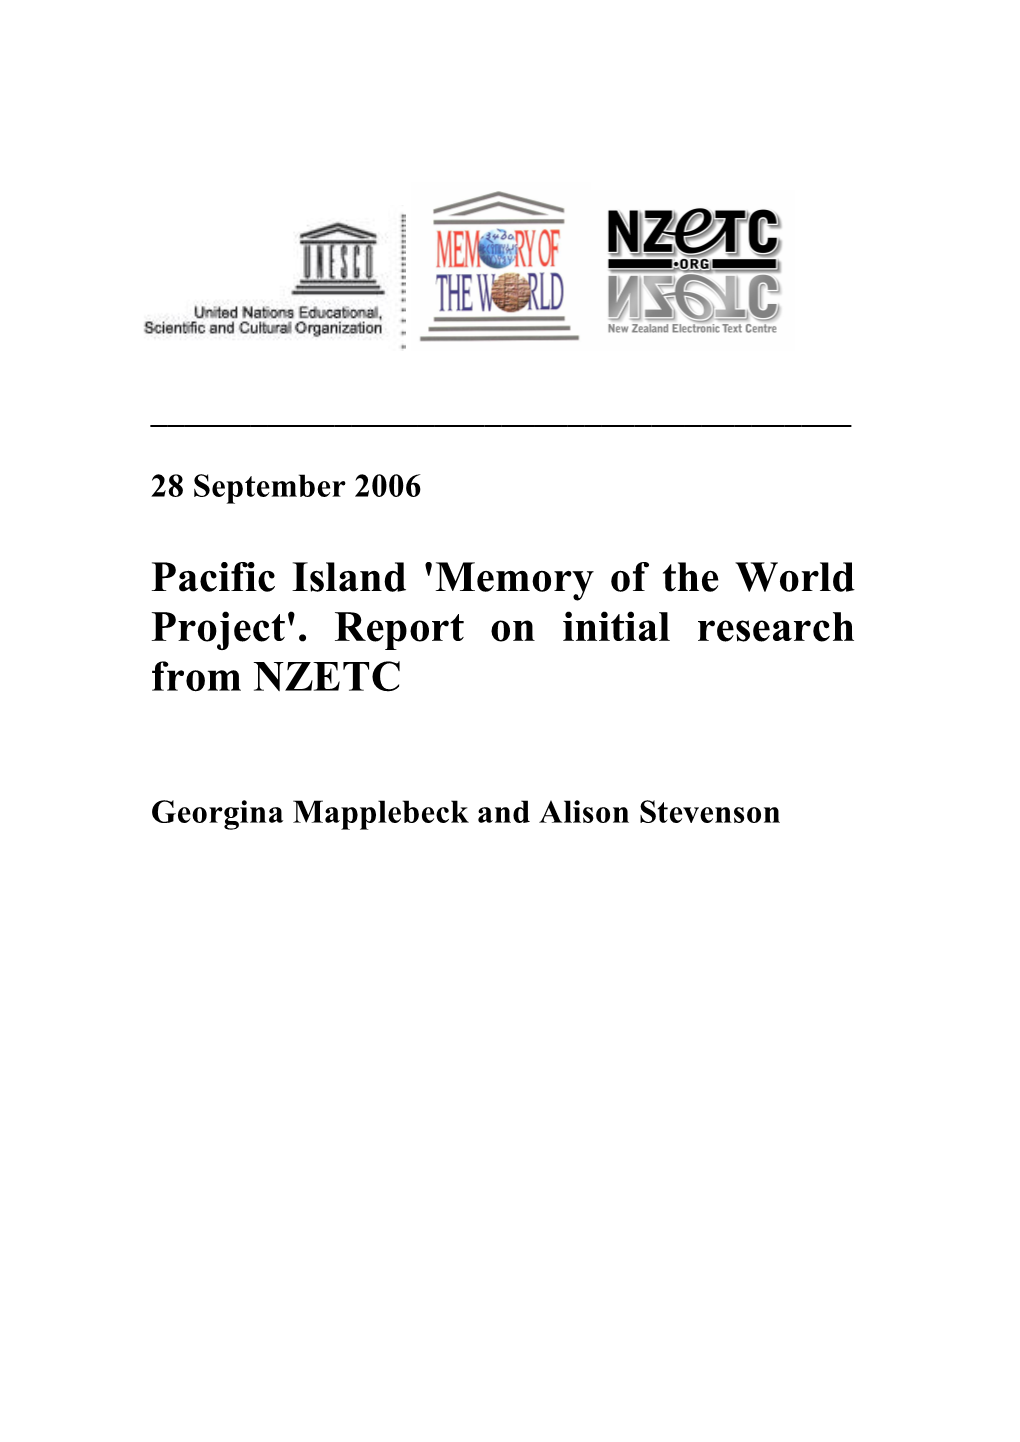 Pacific Island 'Memory of the World Project'. Report on Initial Research from NZETC